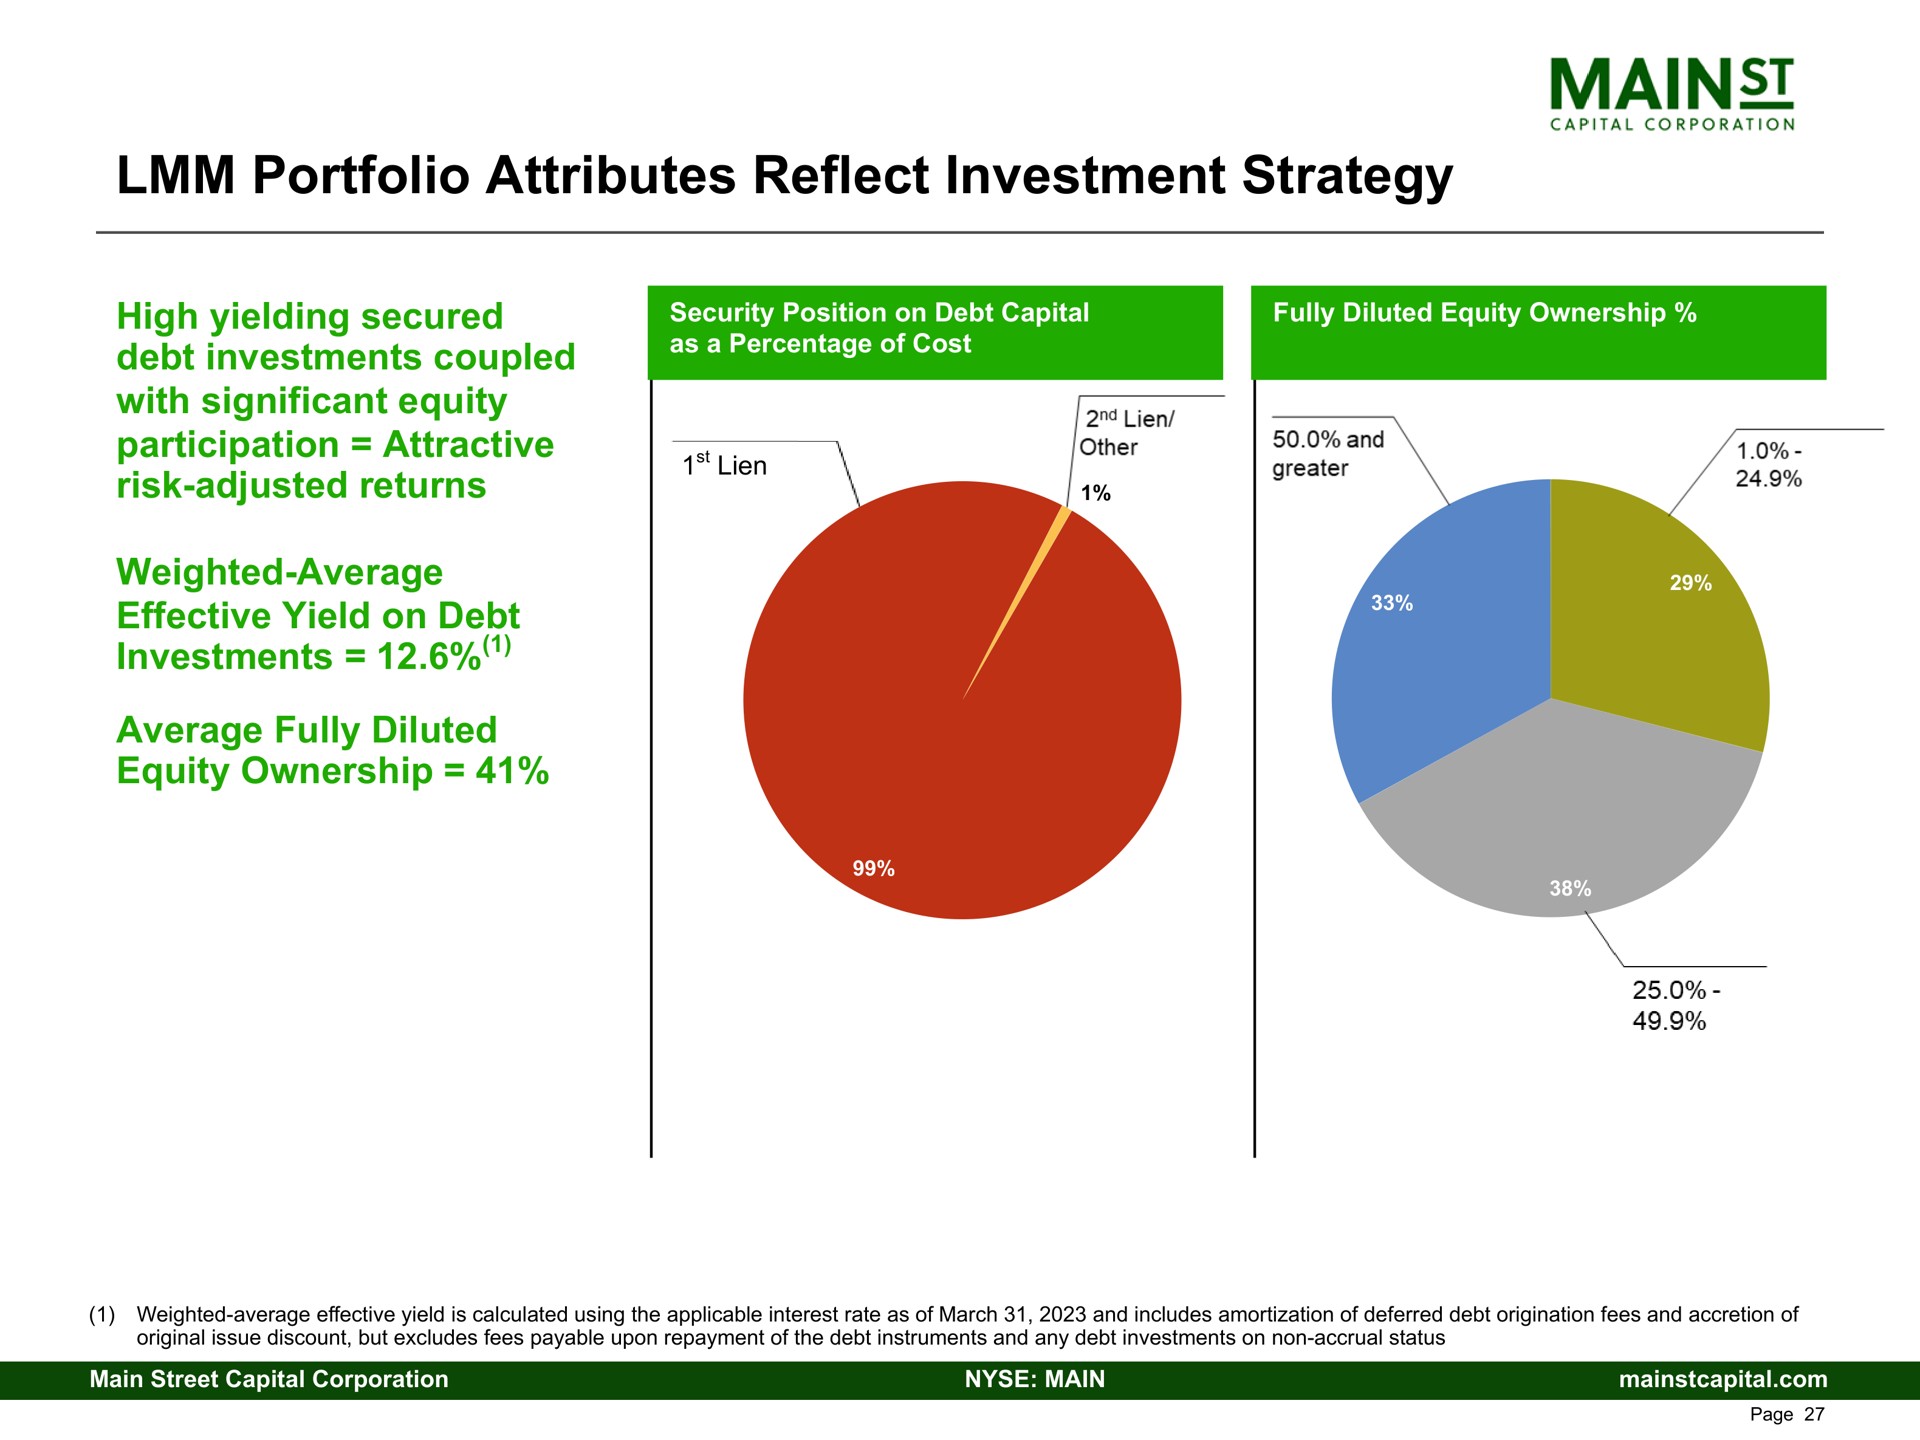 portfolio attributes reflect investment strategy debt investments coupled eel | Main Street Capital